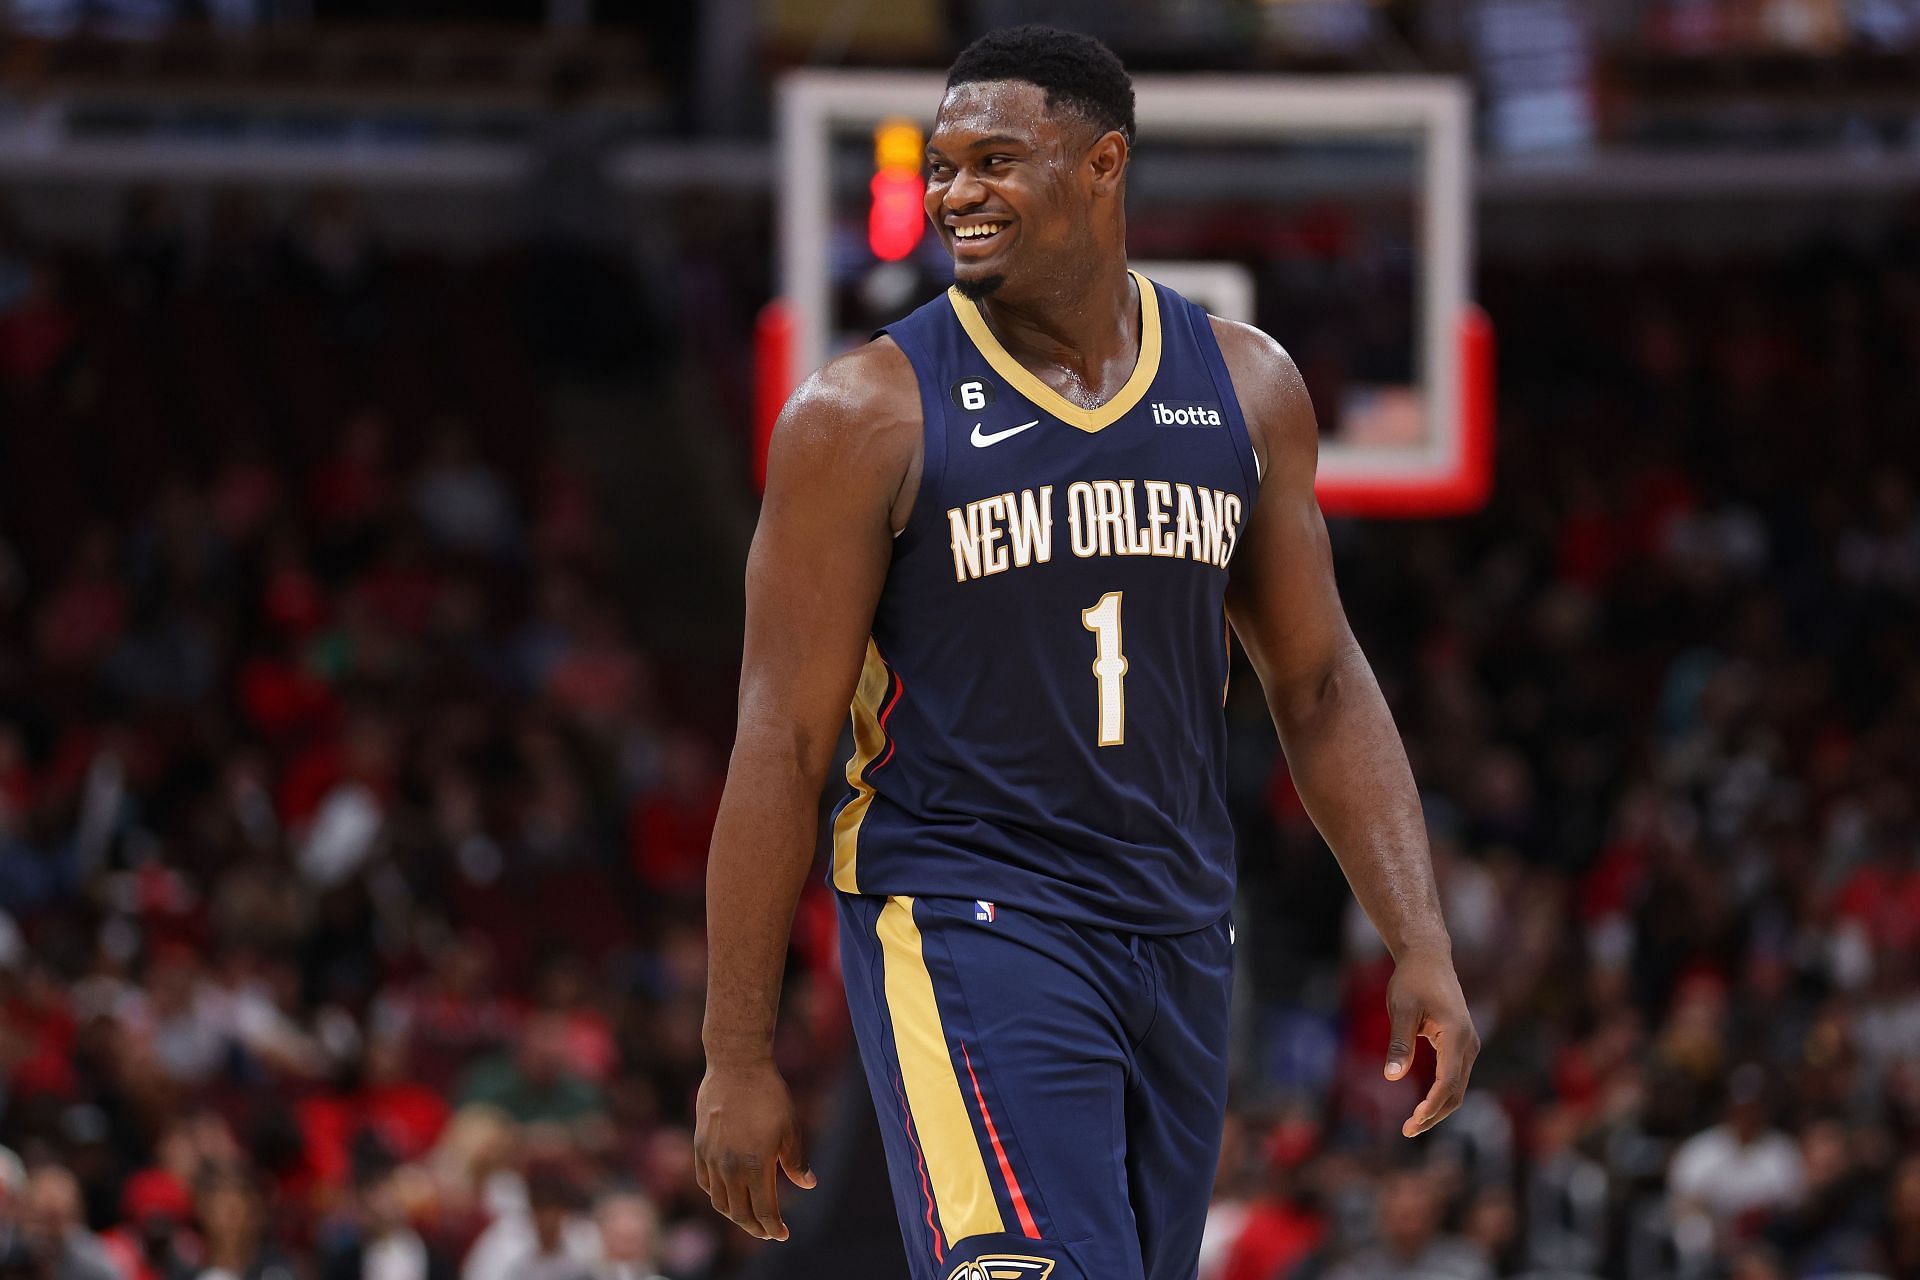 Zion Williamson of the New Orleans Pelicans